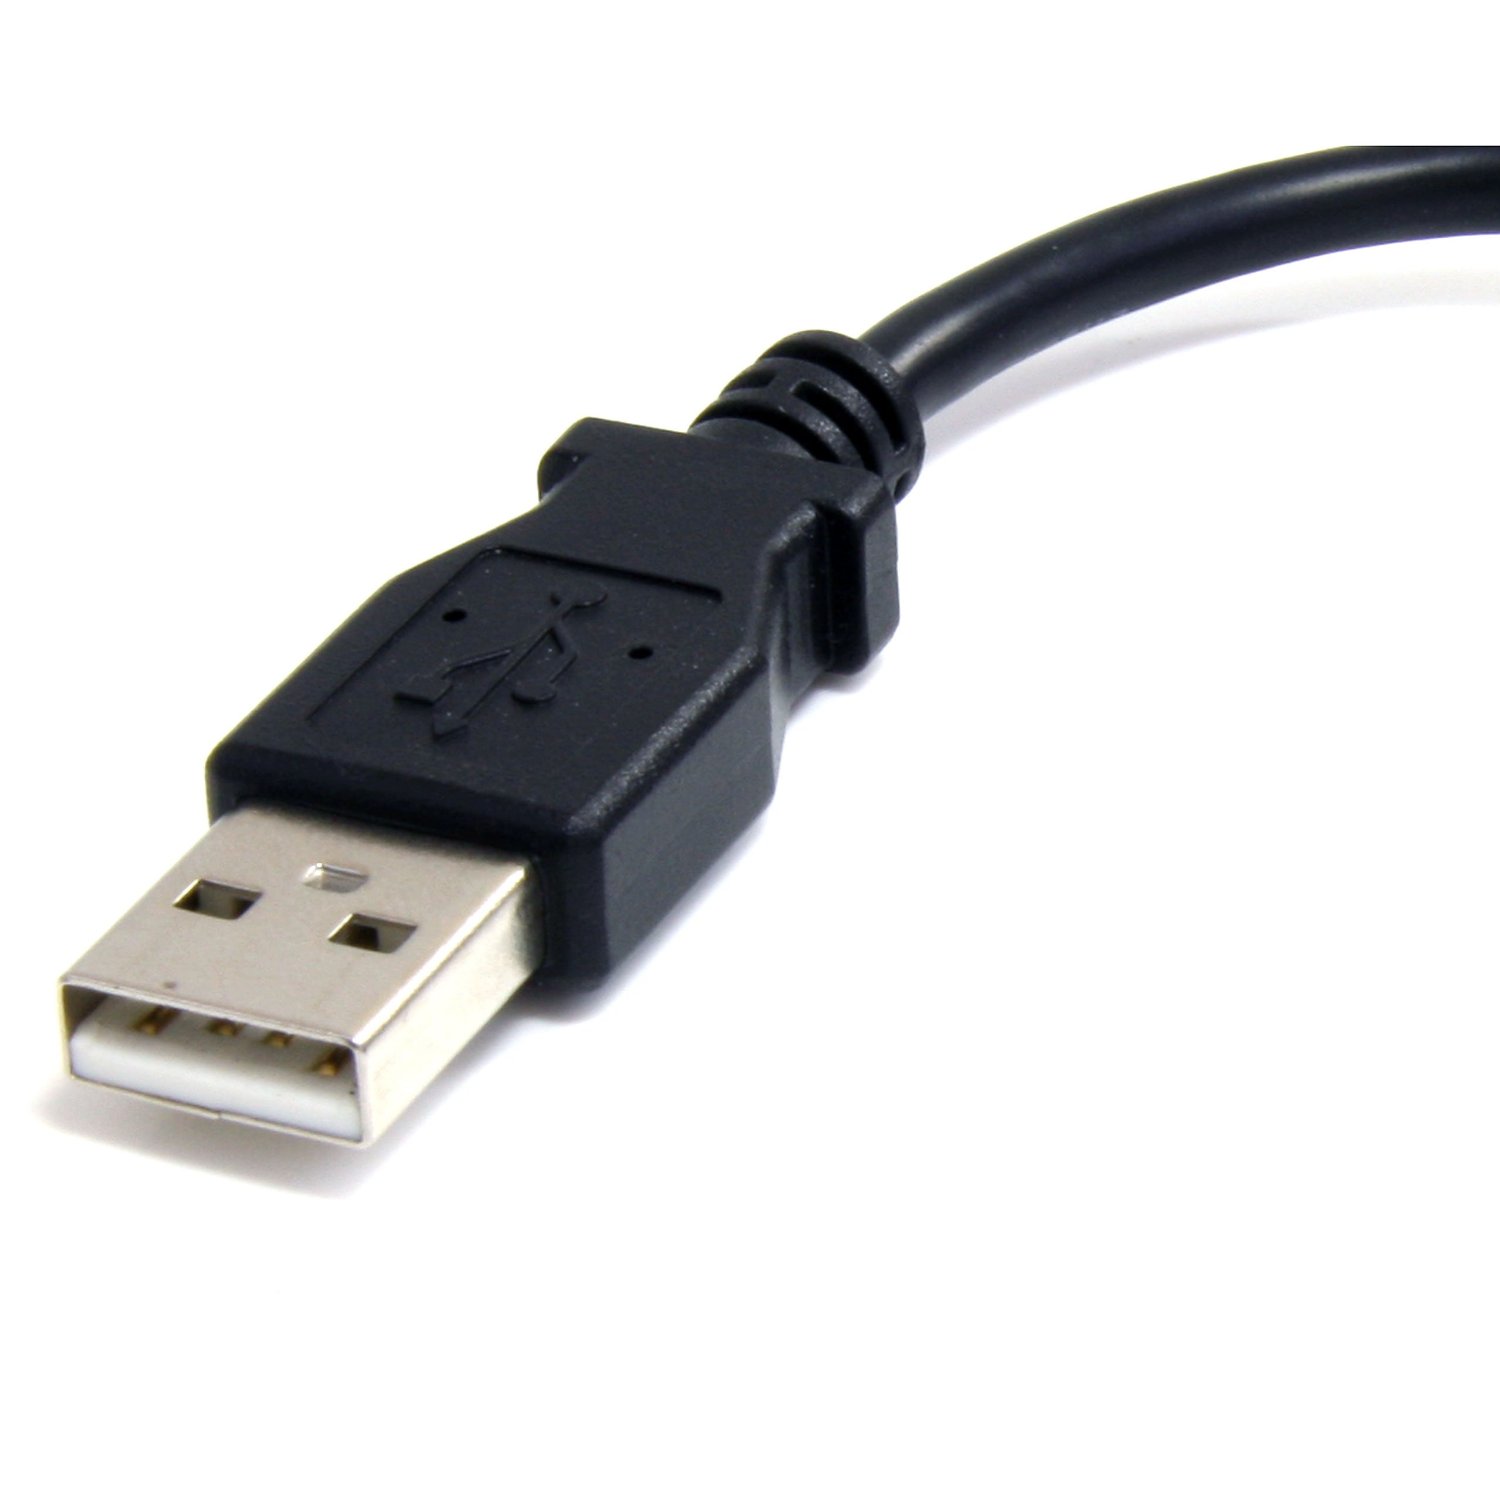 What is the difference between Micro A and Micro B USB